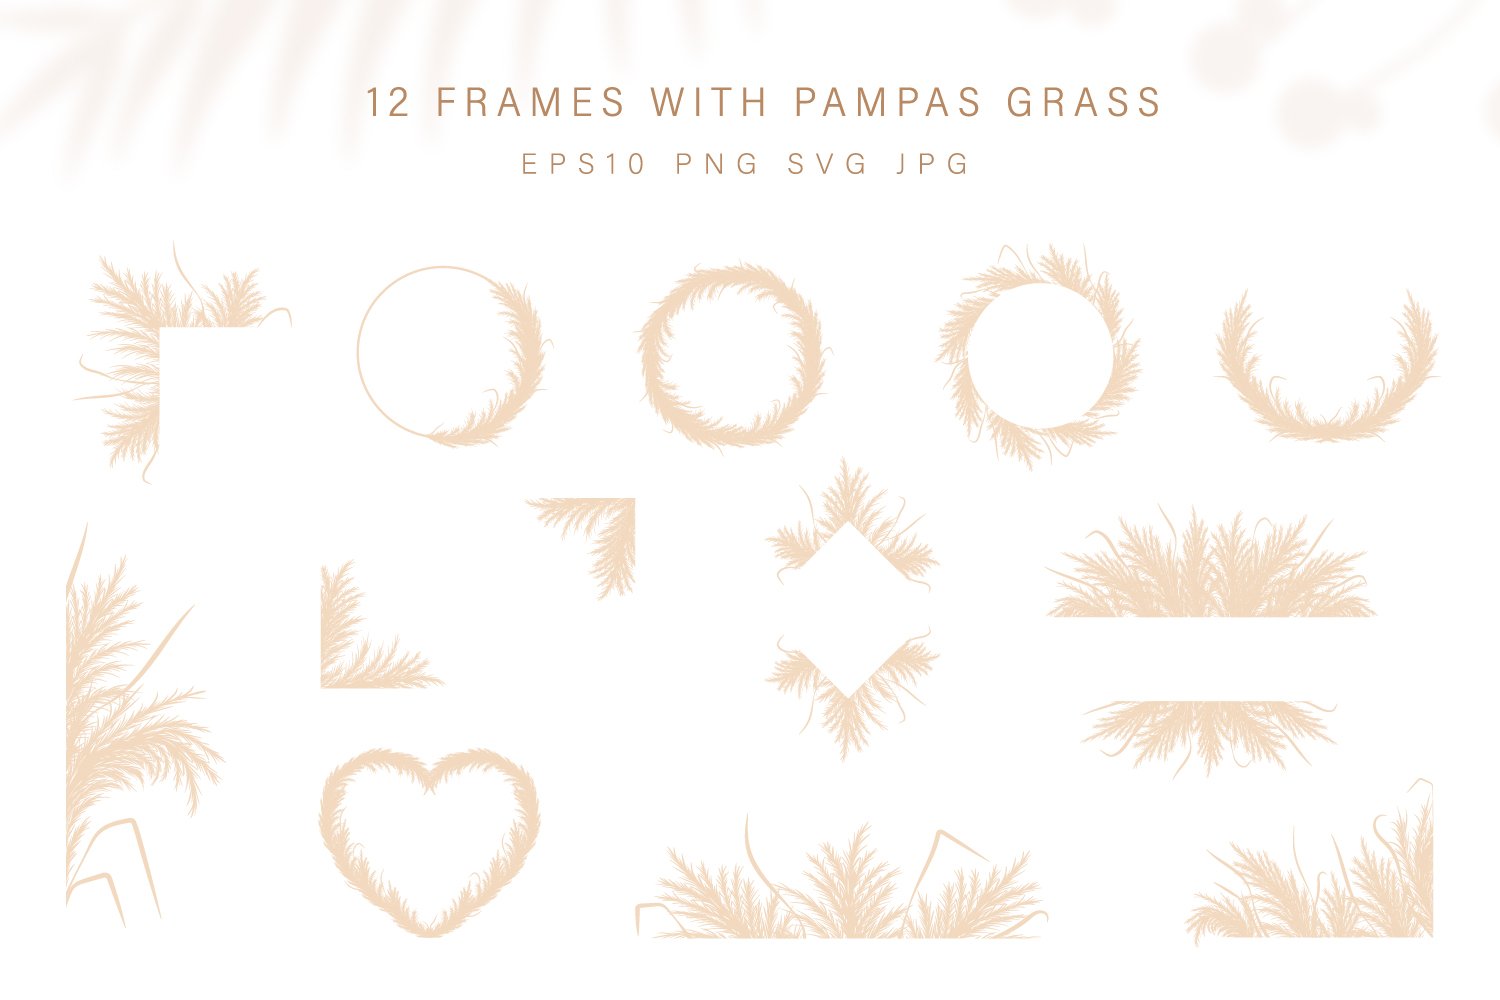 Set of 12 frames with pampas grass.